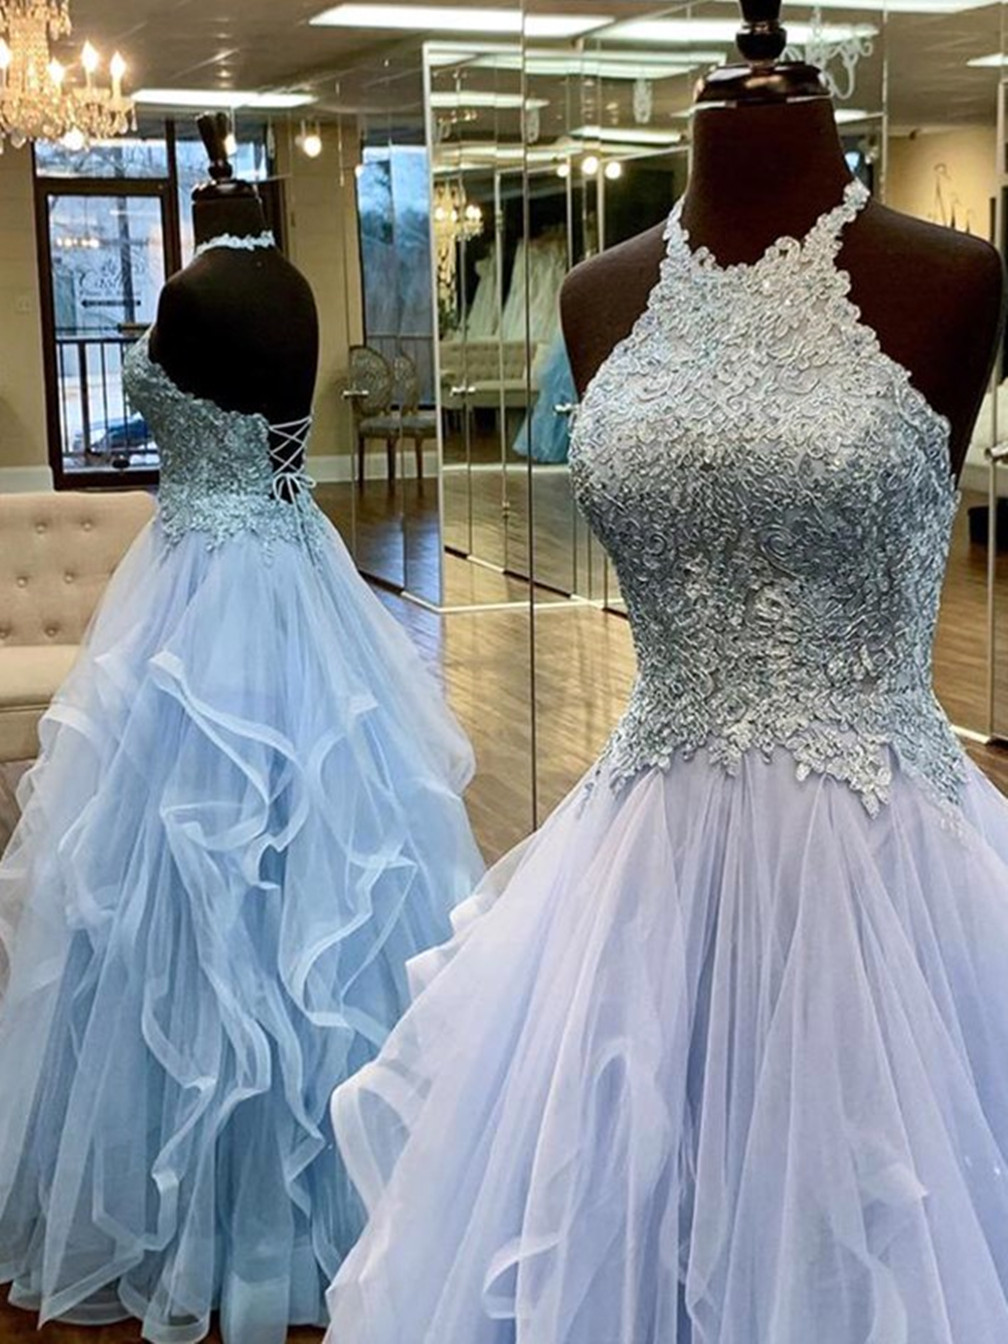 Women Tulle Applique Prom Dresses Long Halter Lace Evening Party Gowns Sleeveless Formal Dress Yp073